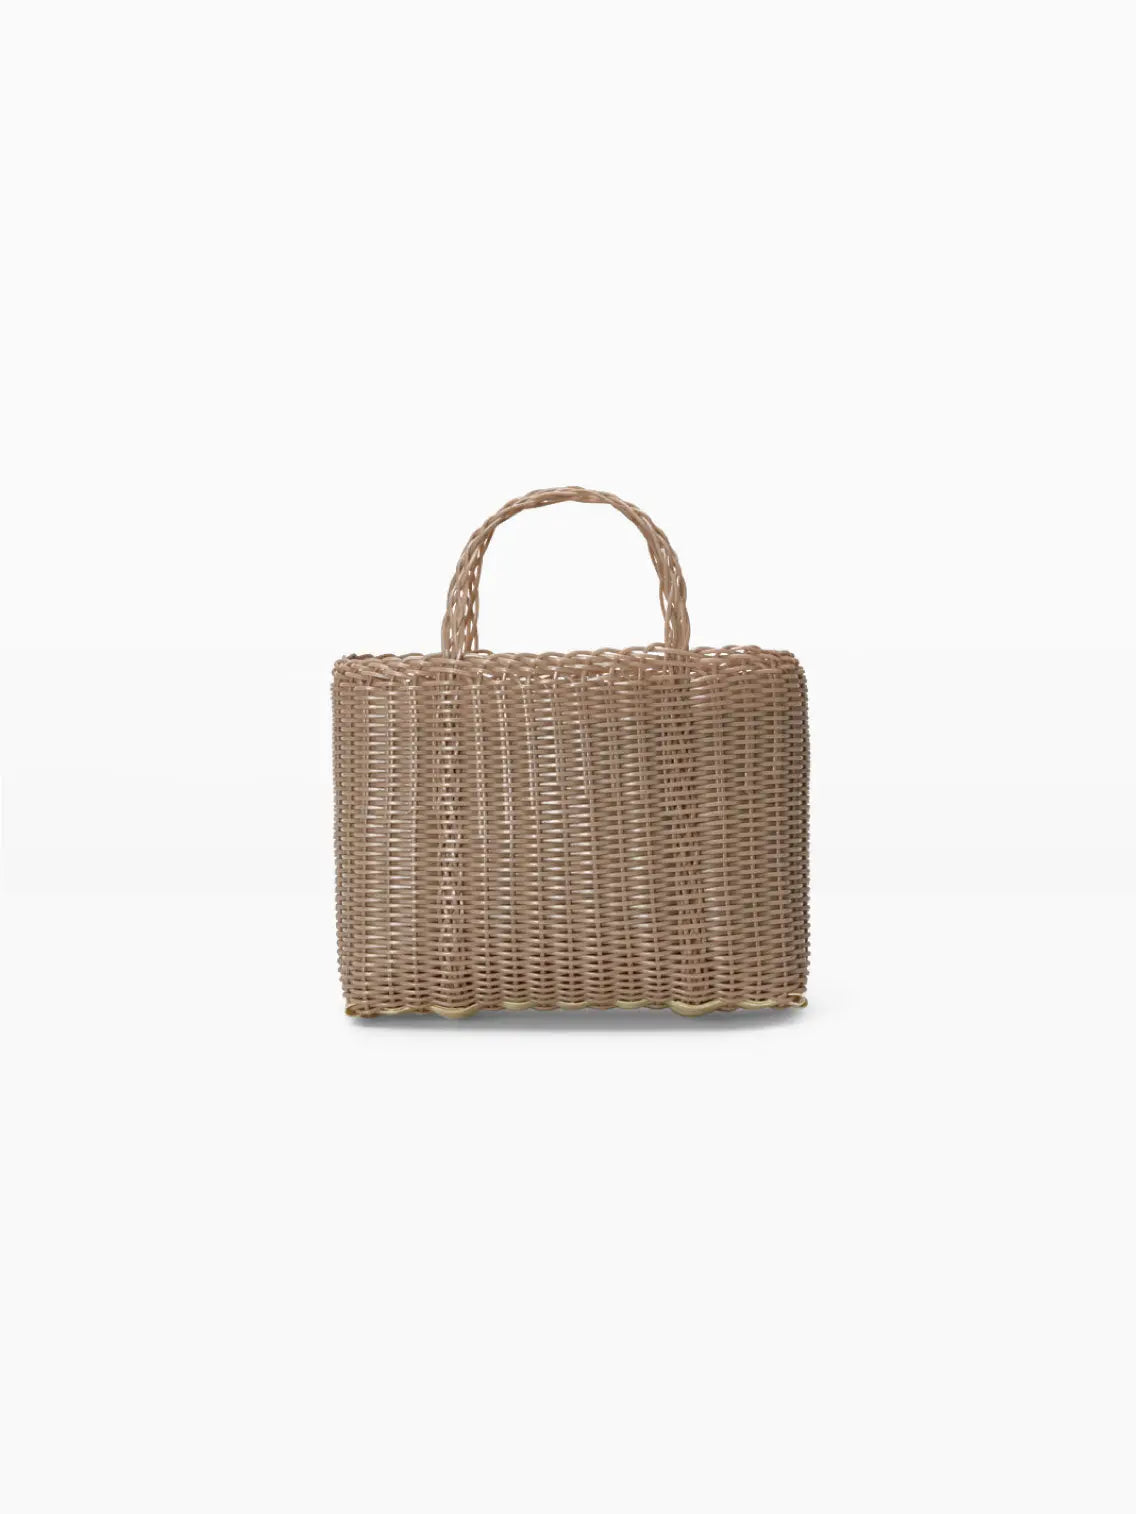 A rectangular, woven rattan handbag with a structured design and two short, sturdy handles. The bag features a natural beige color and a clean, minimalist appearance, standing upright against a plain white background. Perfect for summer outings in Barcelona or shopping at Bassalstore. Introducing the **Mini Tote Sand Bag** by **Palorosa**.